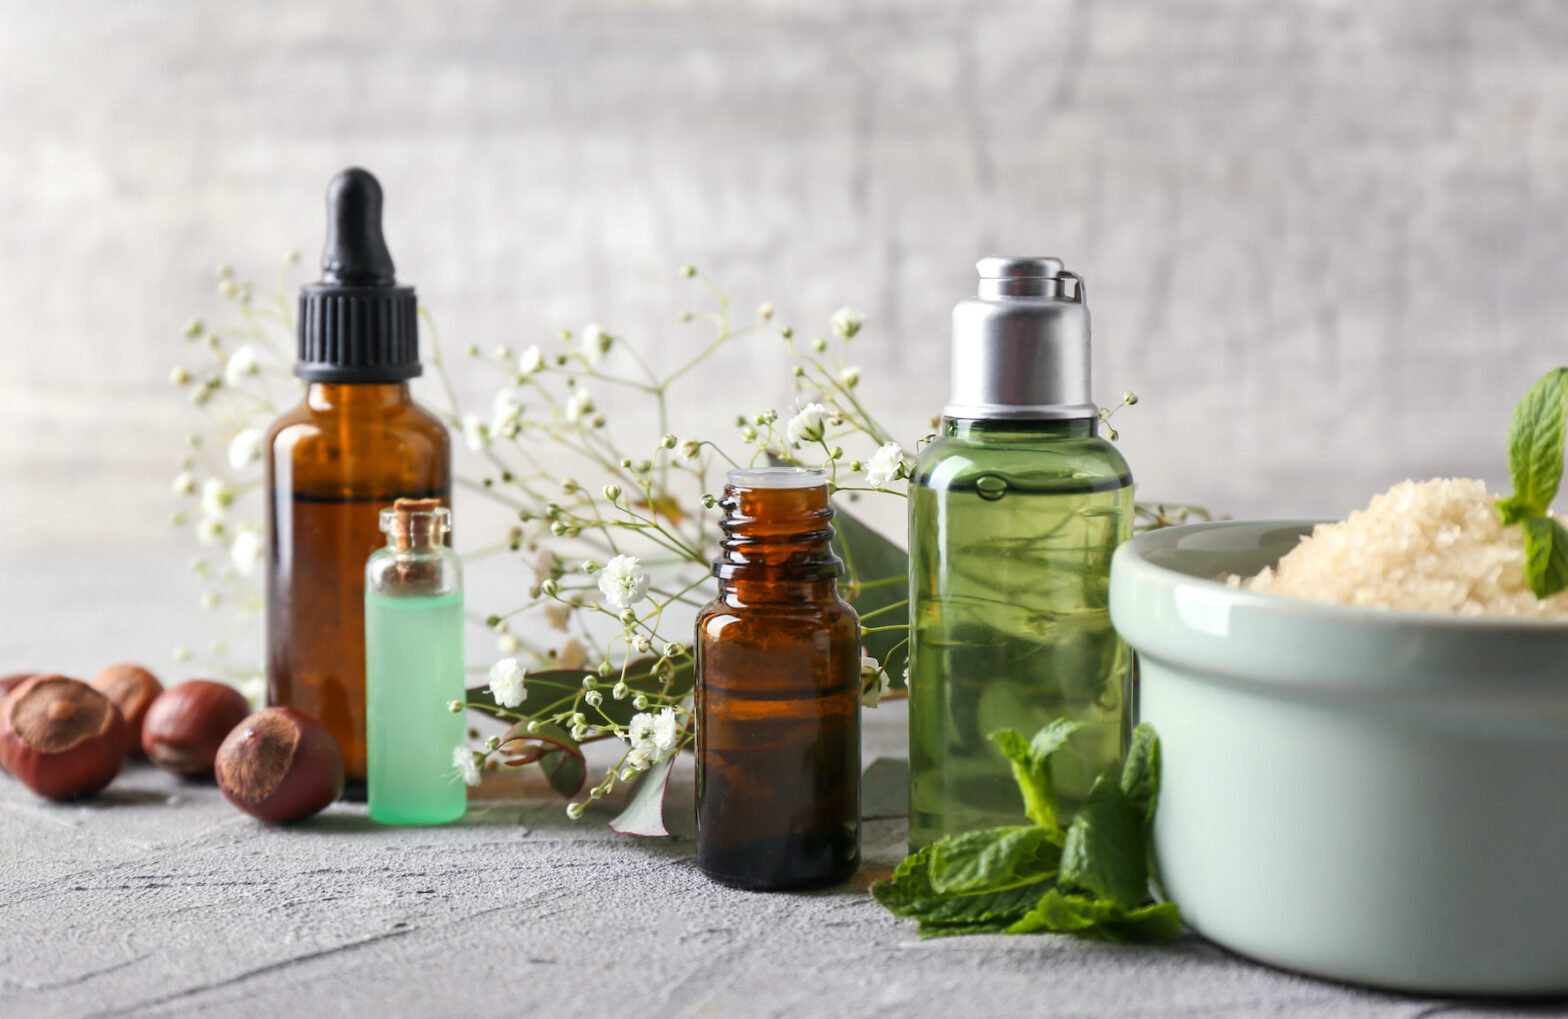 Anti-Pollution Skin Care Products Market